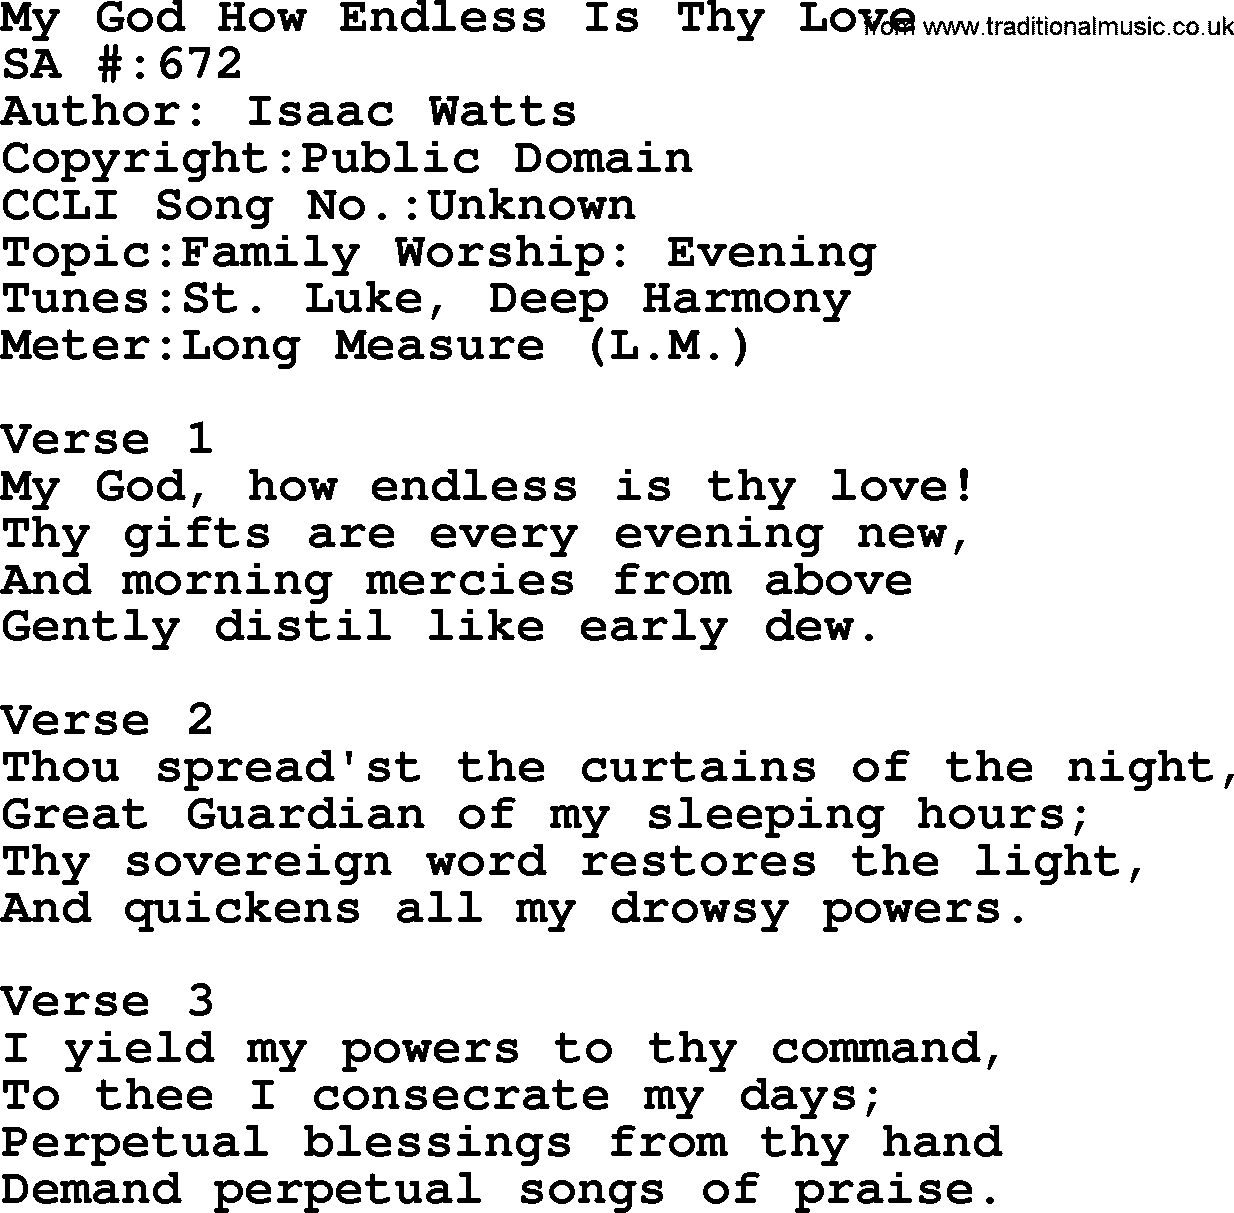 Salvation Army Hymnal, title: My God How Endless Is Thy Love, with lyrics and PDF,